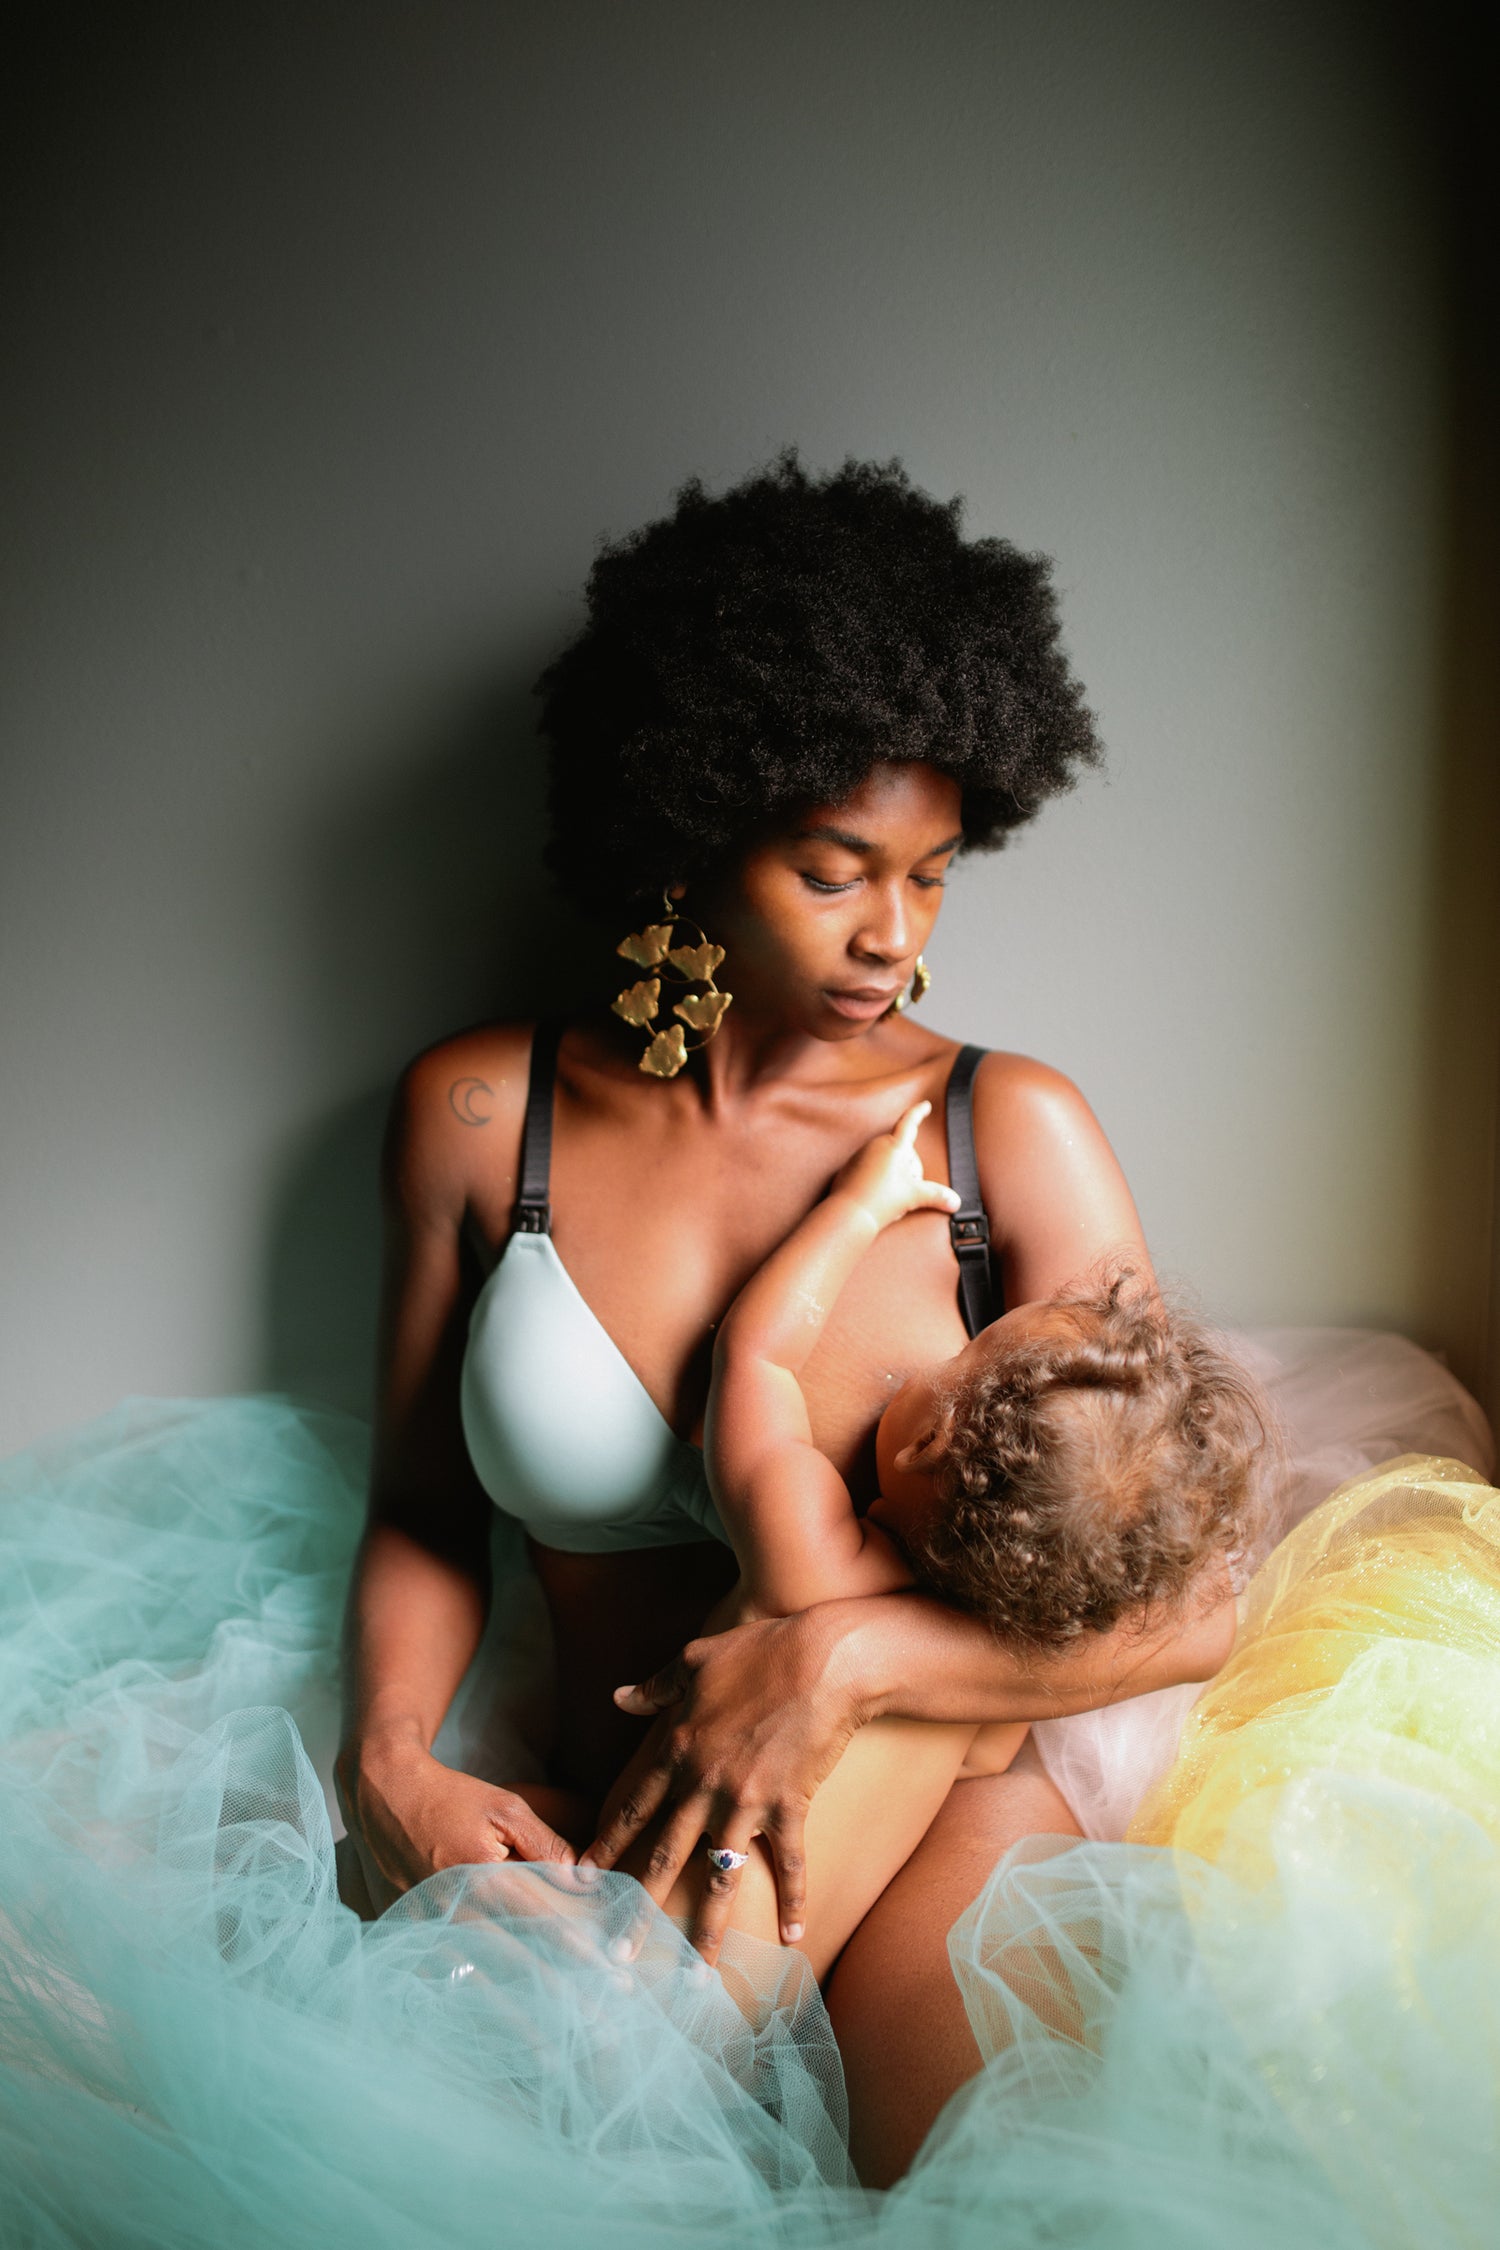 Nursing and Breastfeeding Tips and Tricks for Moms